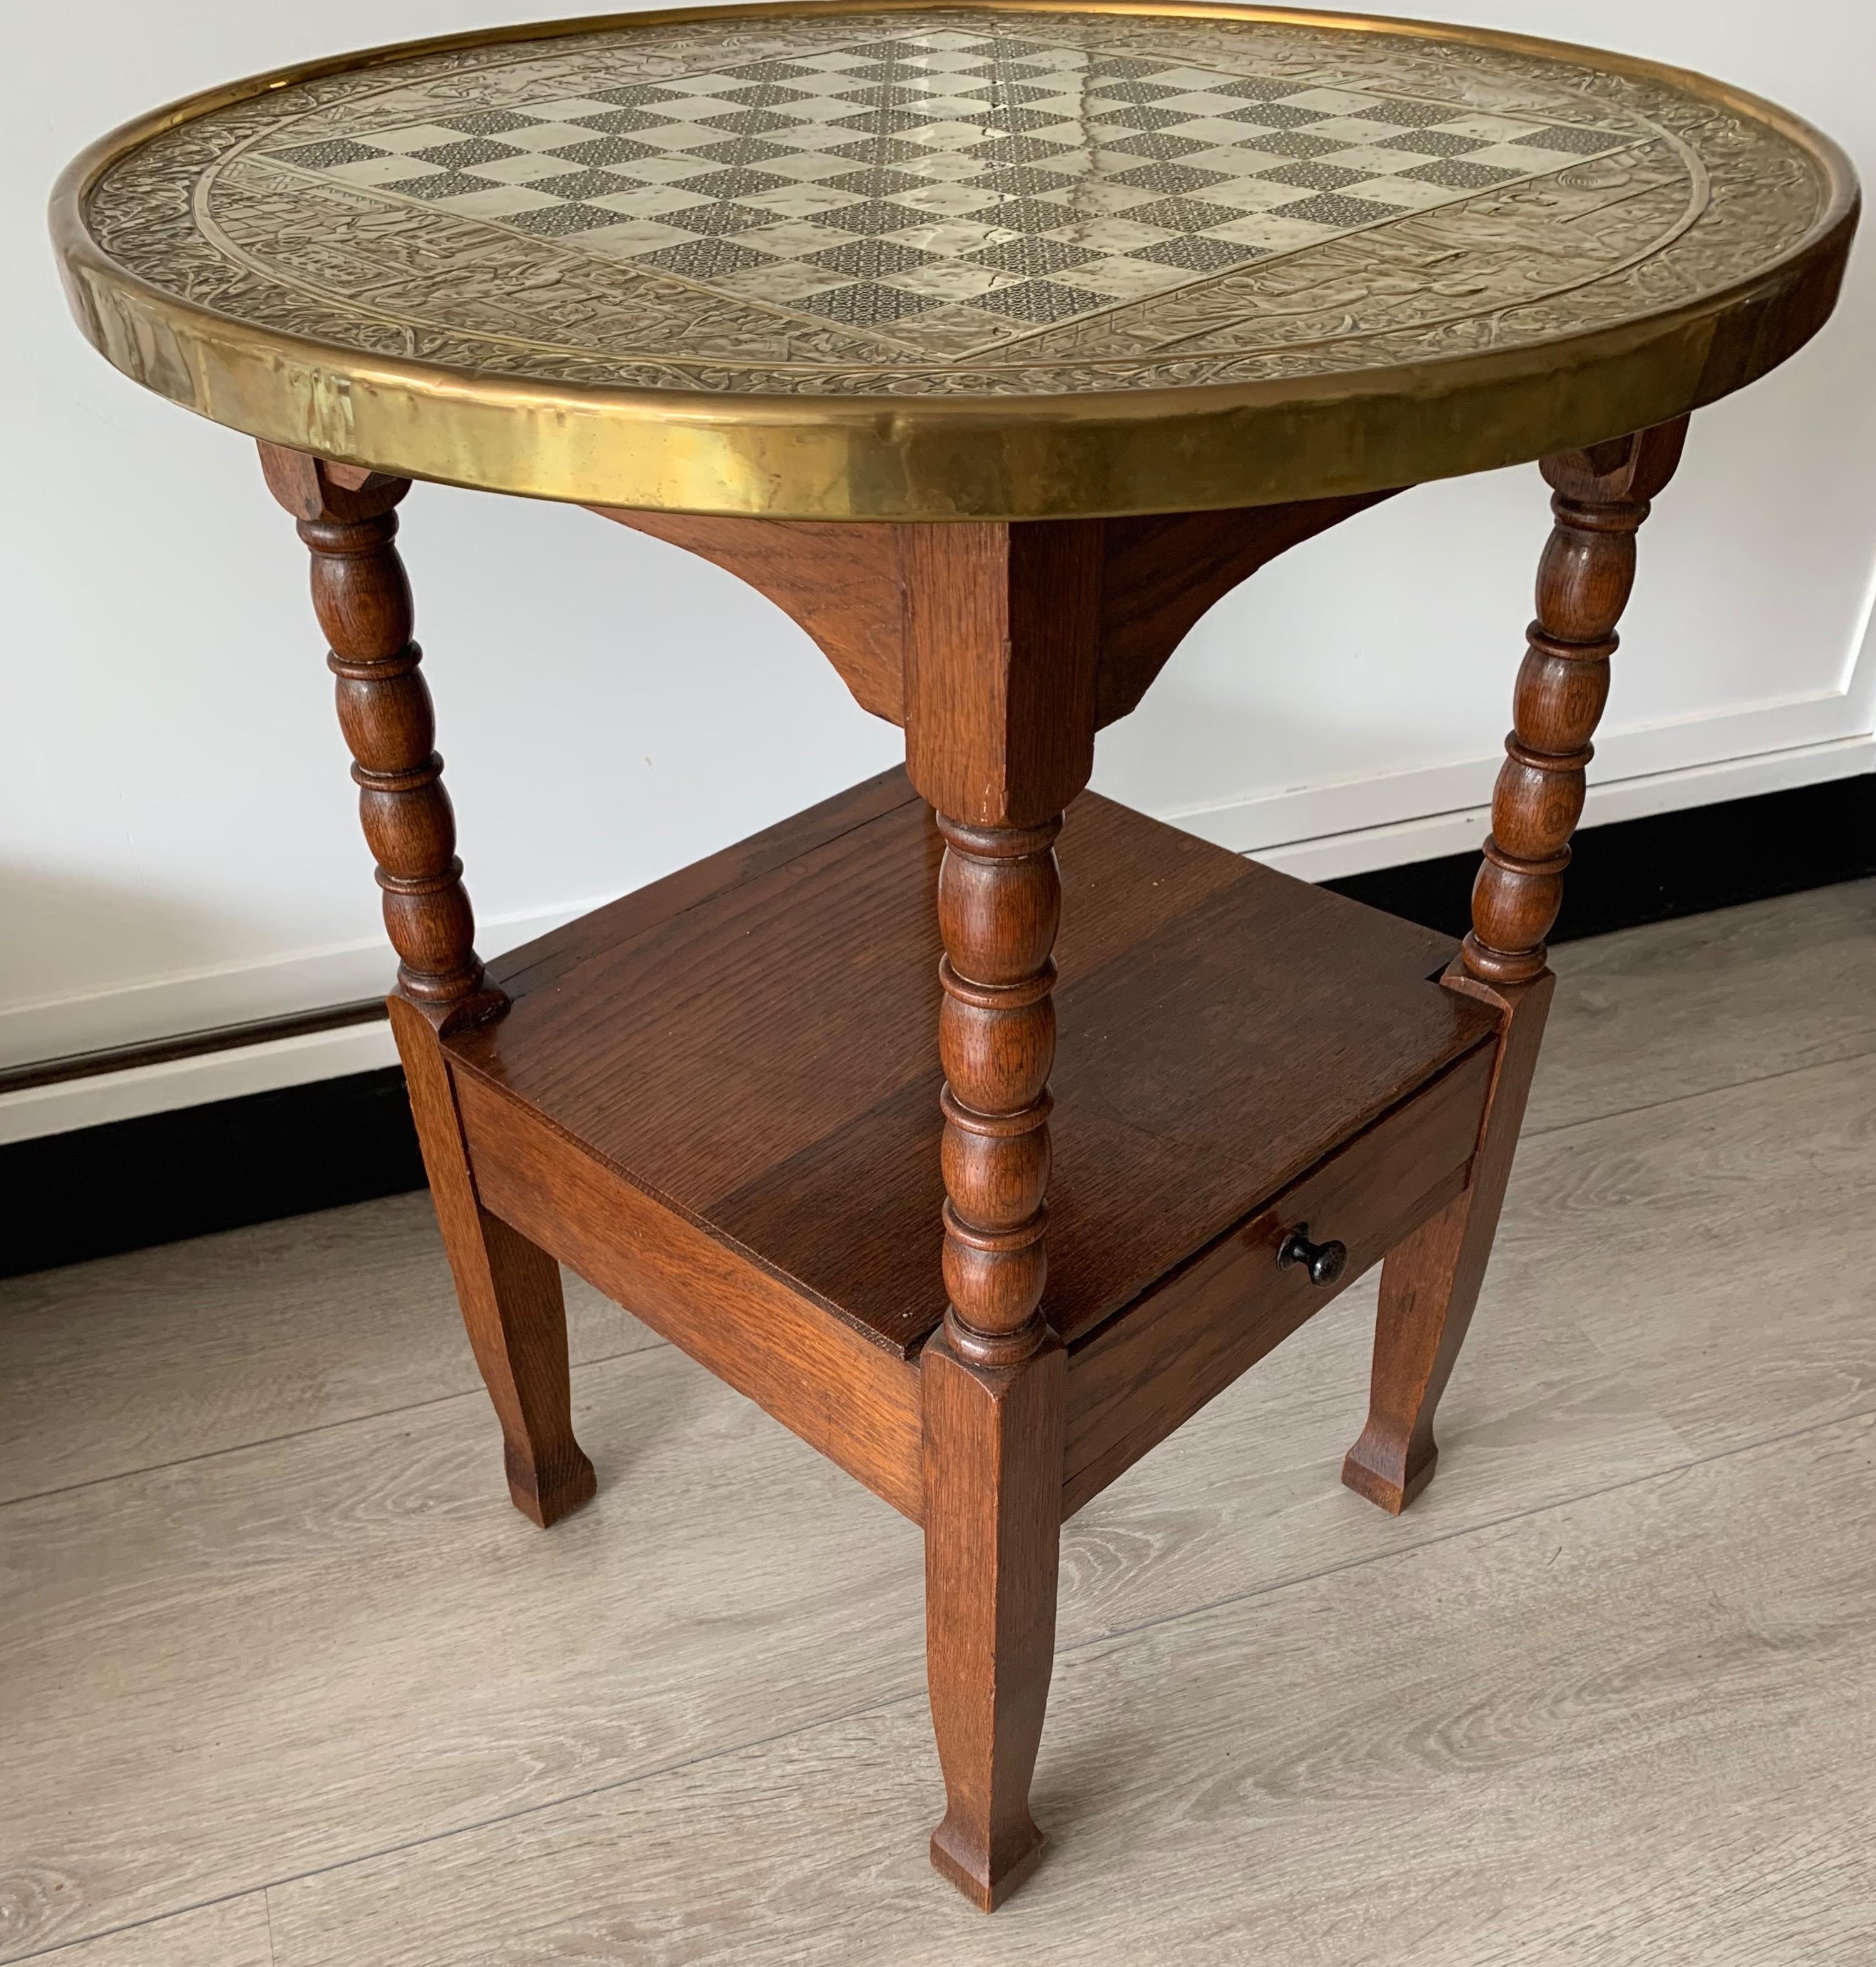 Early 1900s Dutch Arts & Crafts Checkers/Draughts Table with Embossed Brass Top 7